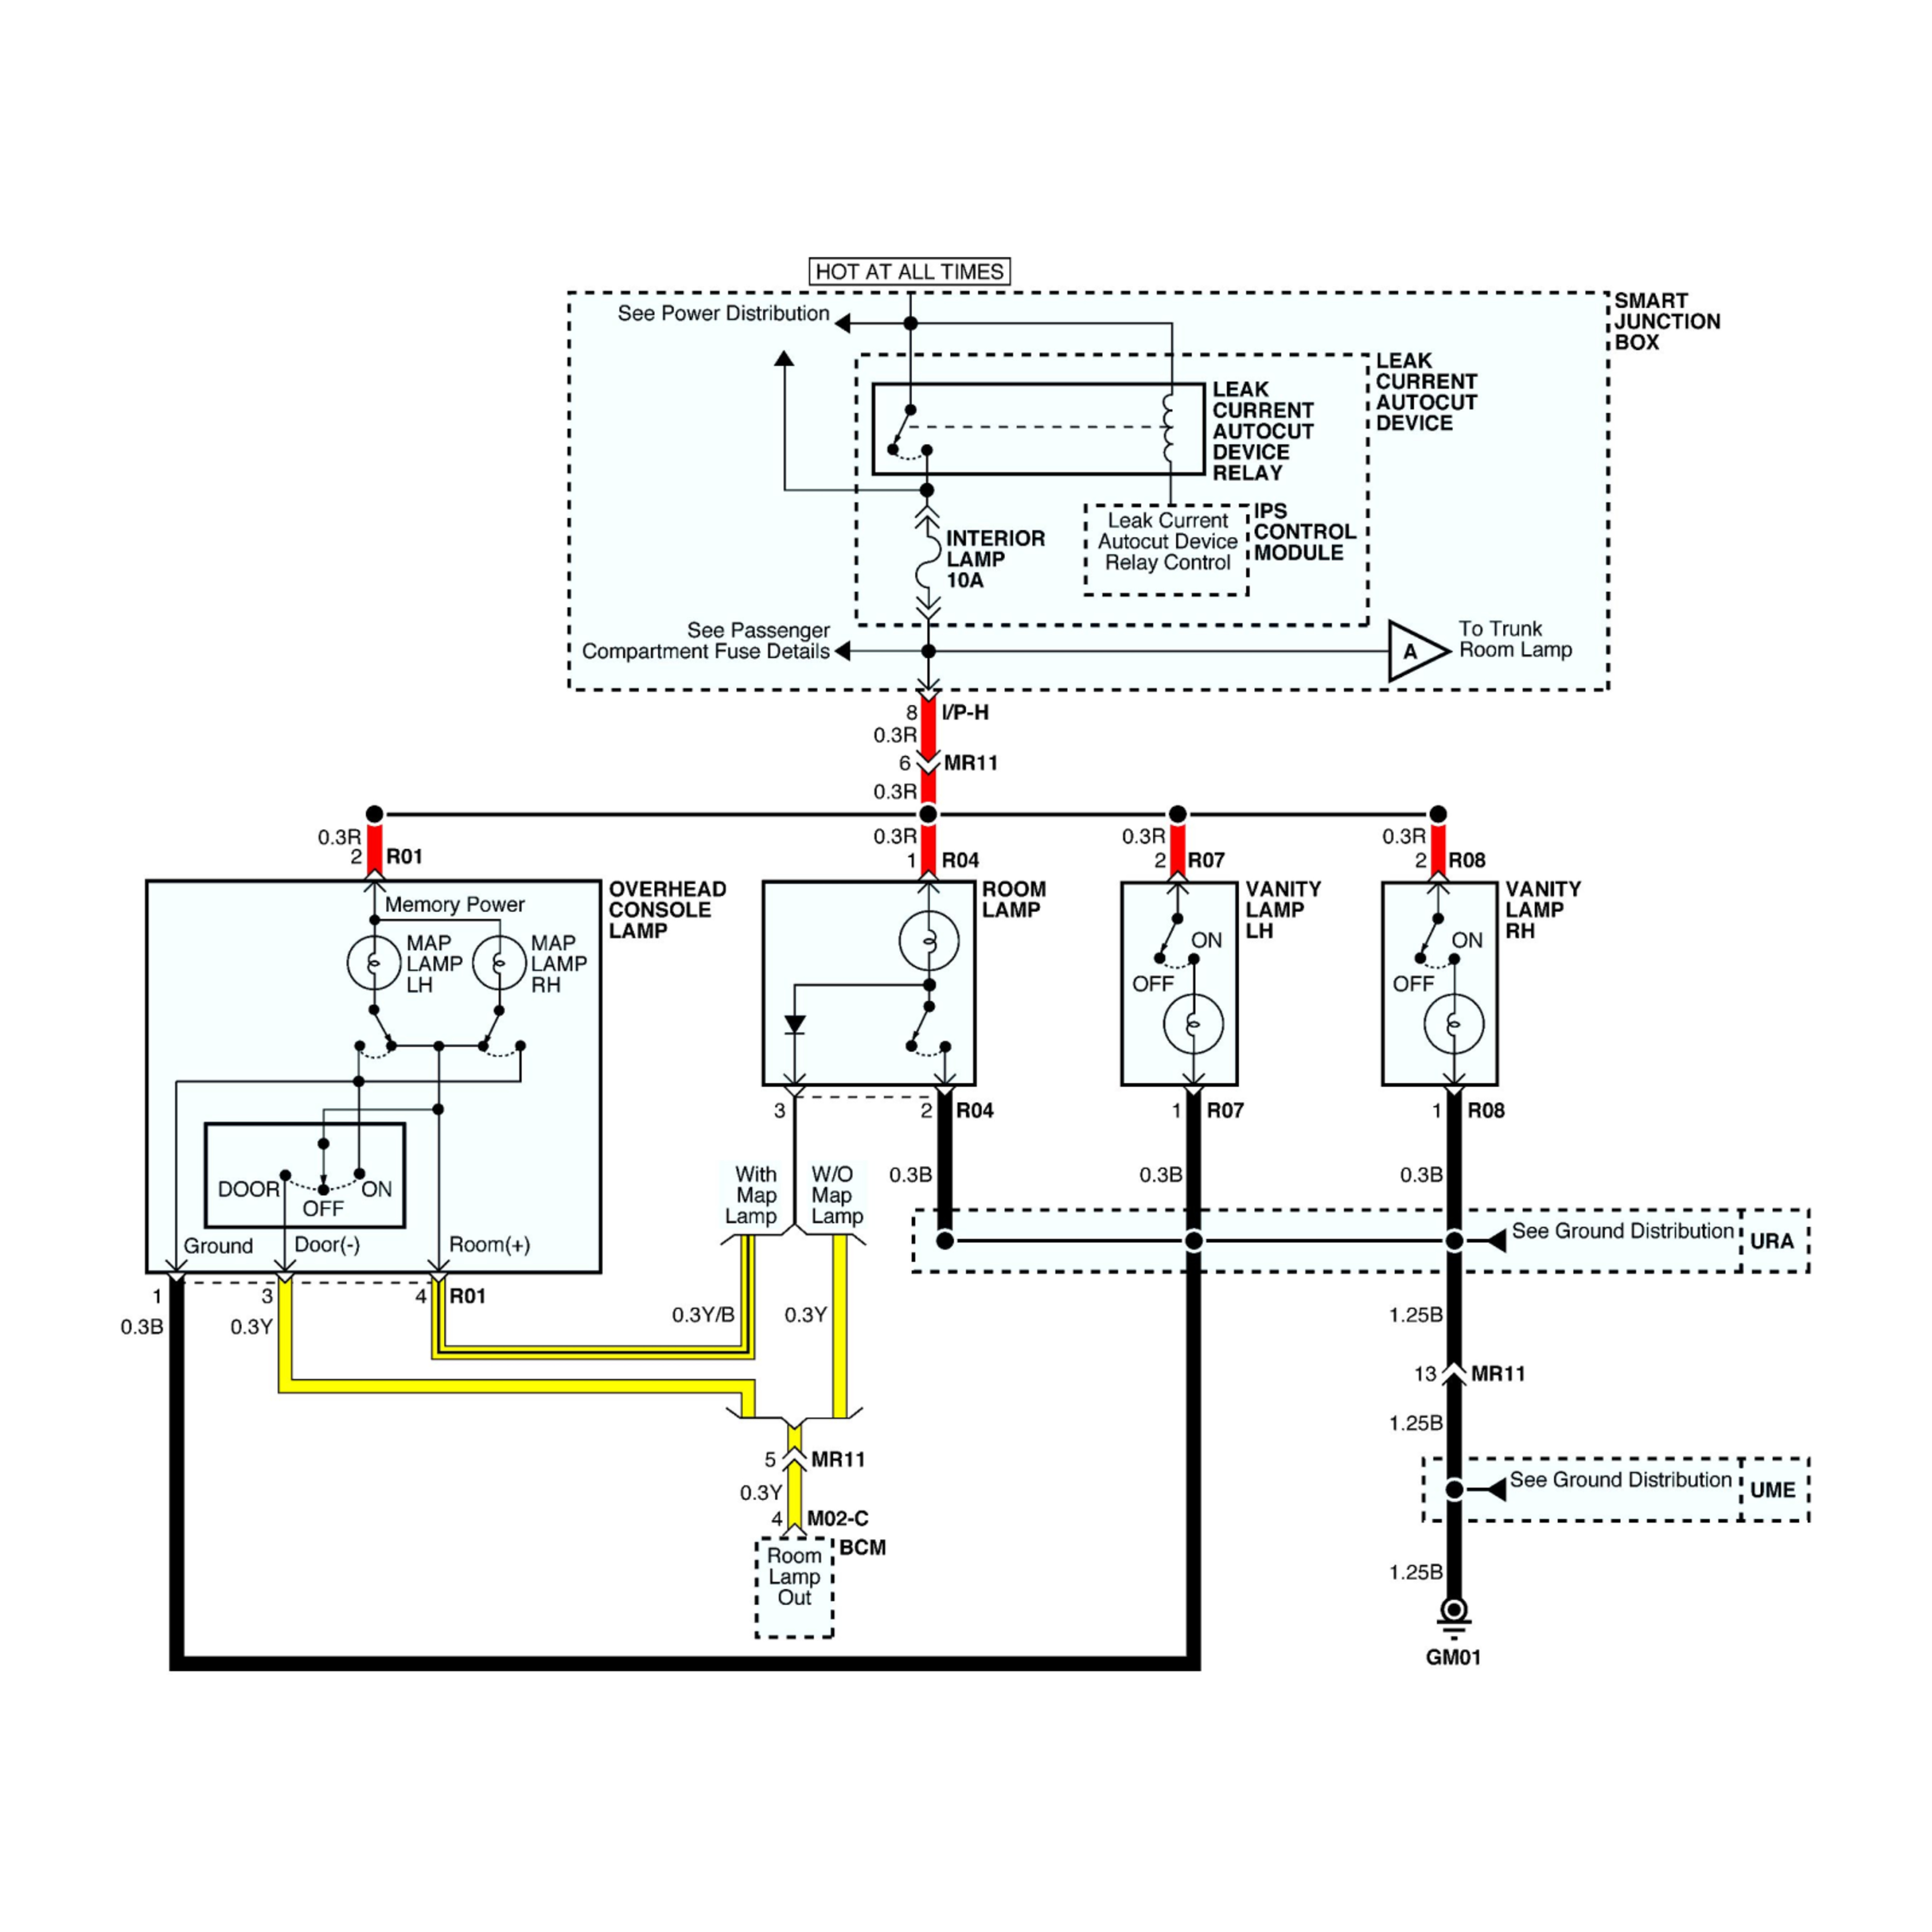 2002 Ford E-350 Super Duty wiring diagrams example